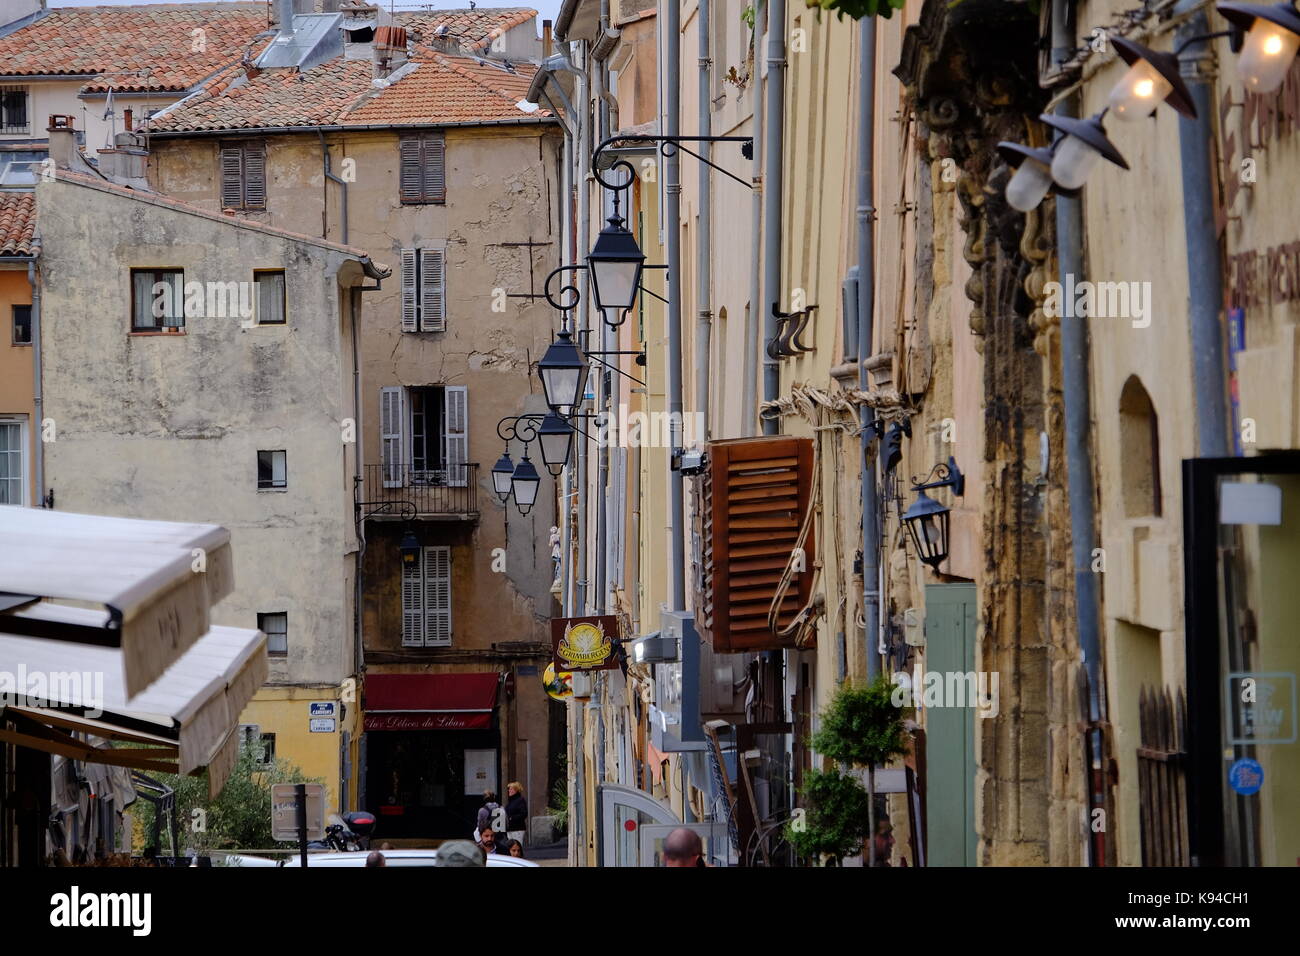 Old buildings and street lamps in Aix en Provence, South Of France Stock Photo